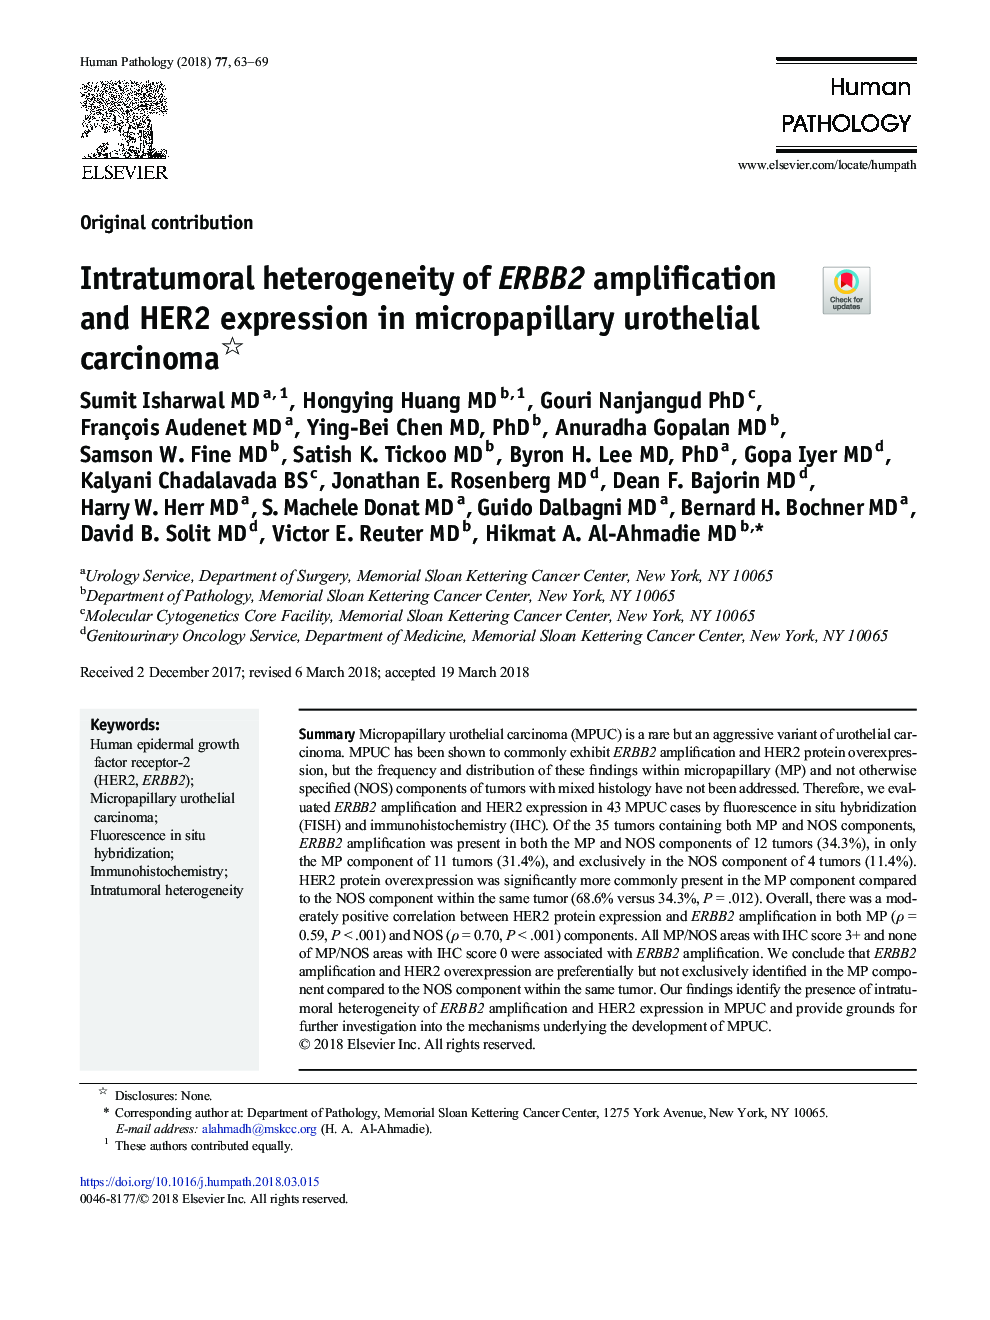 Intratumoral heterogeneity of ERBB2 amplification and HER2 expression in micropapillary urothelial carcinoma